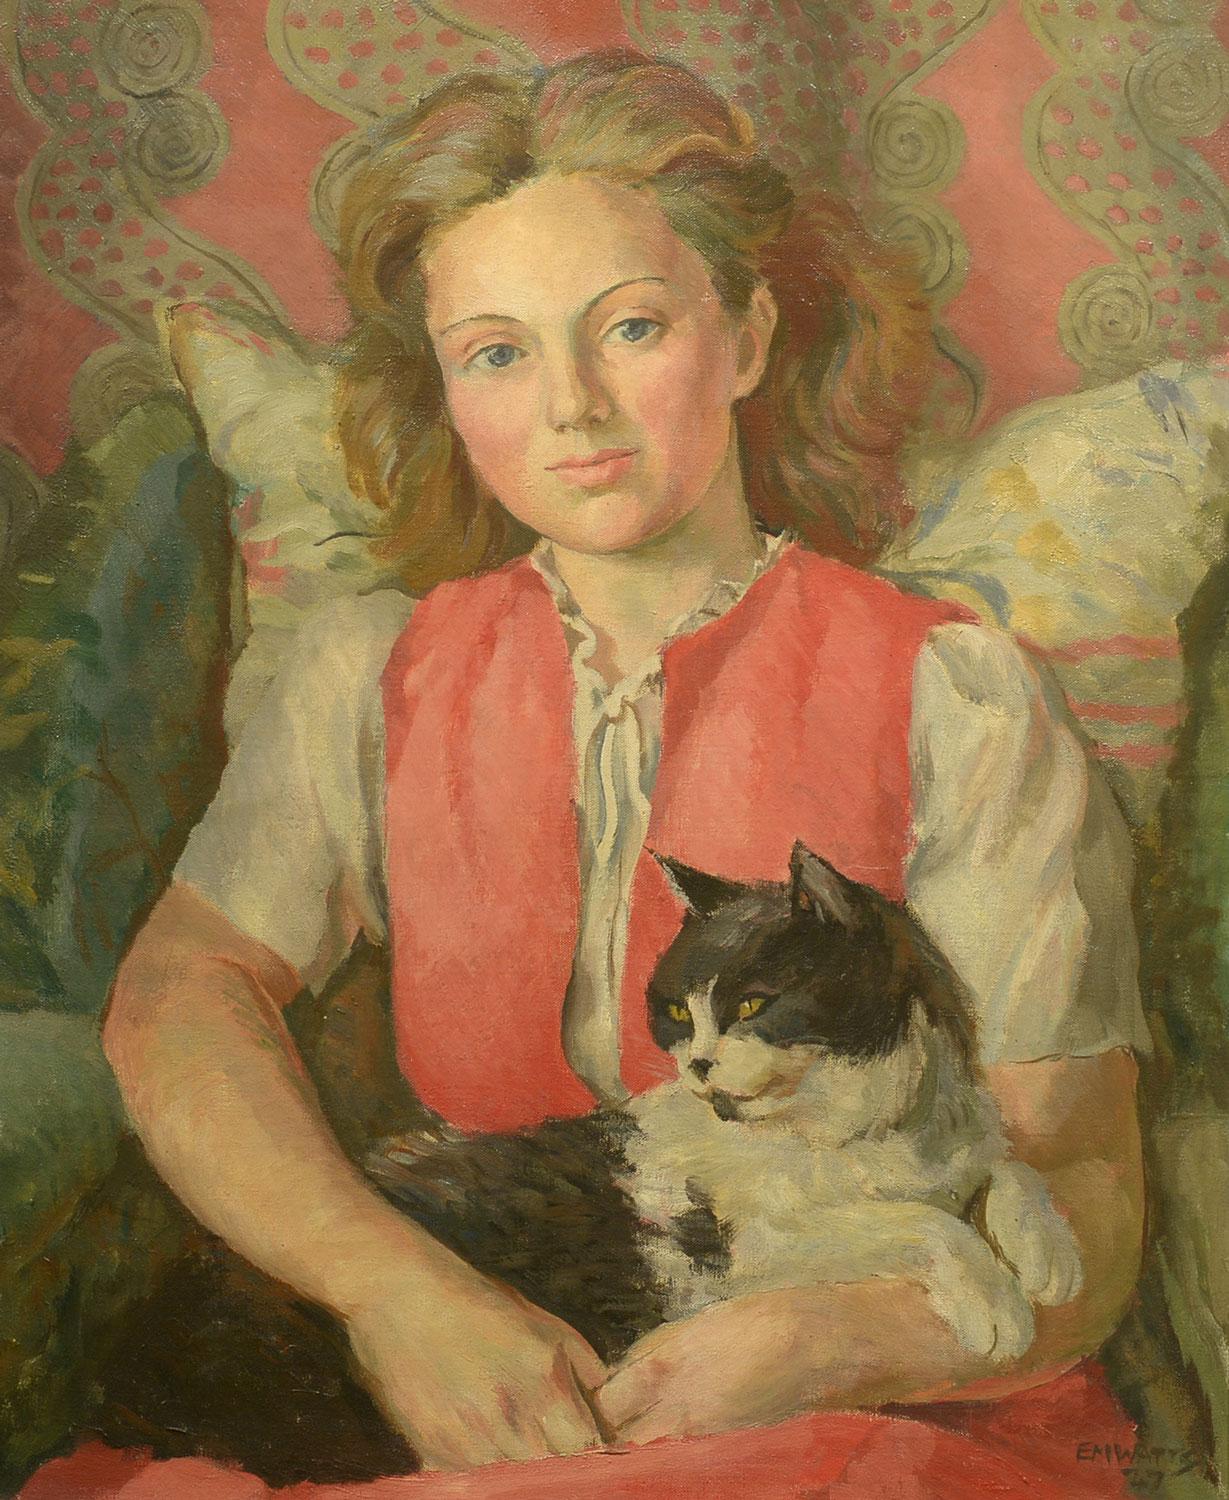 Animal Painting E. M. Watts - « A Girl with Her Cat, 1947 », EM Watts, huile sur toile, portrait